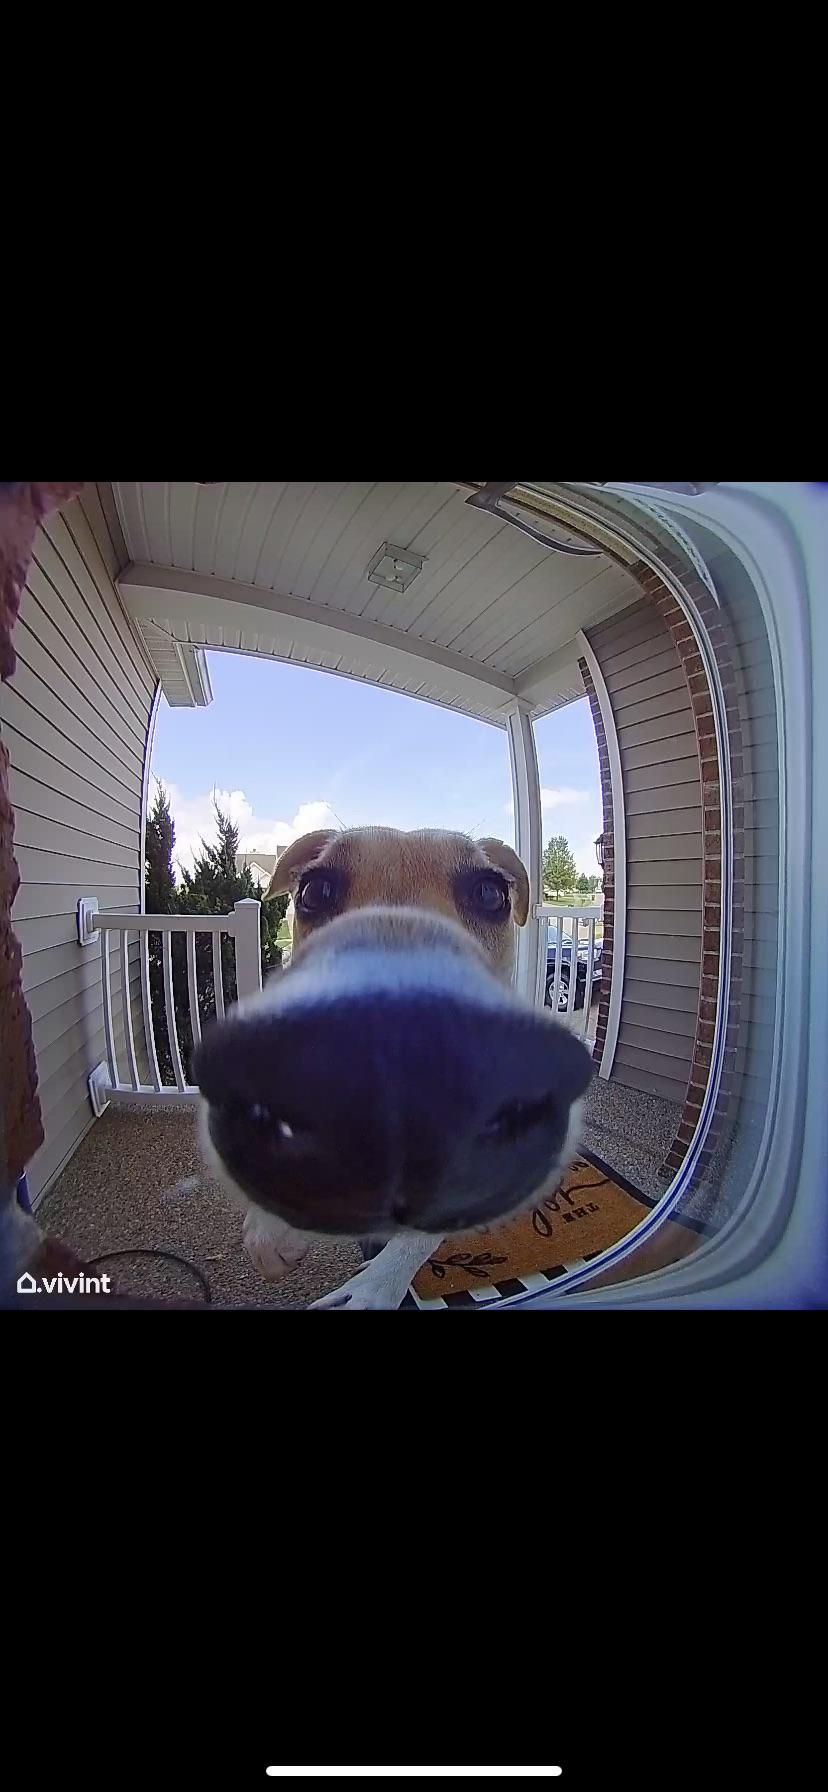 My dog learned how to use the doorbell.